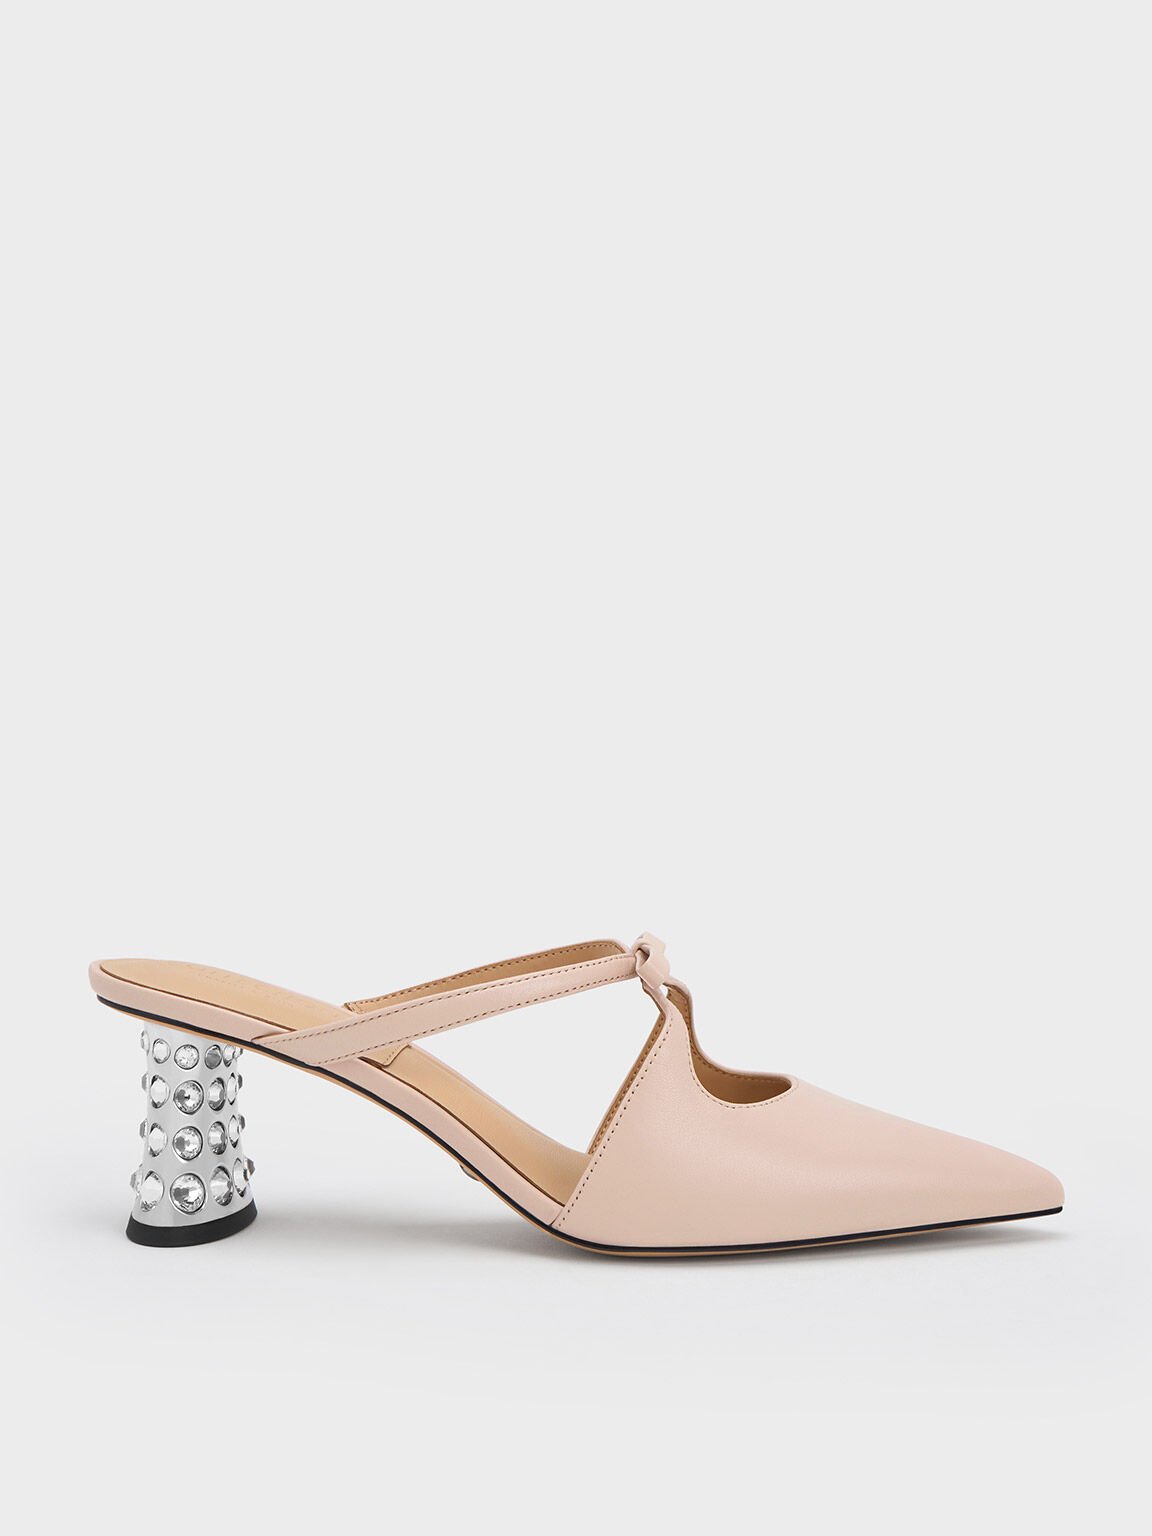 Nude Bow Crossover Gem-Embellished Mules - CHARLES & KEITH MO